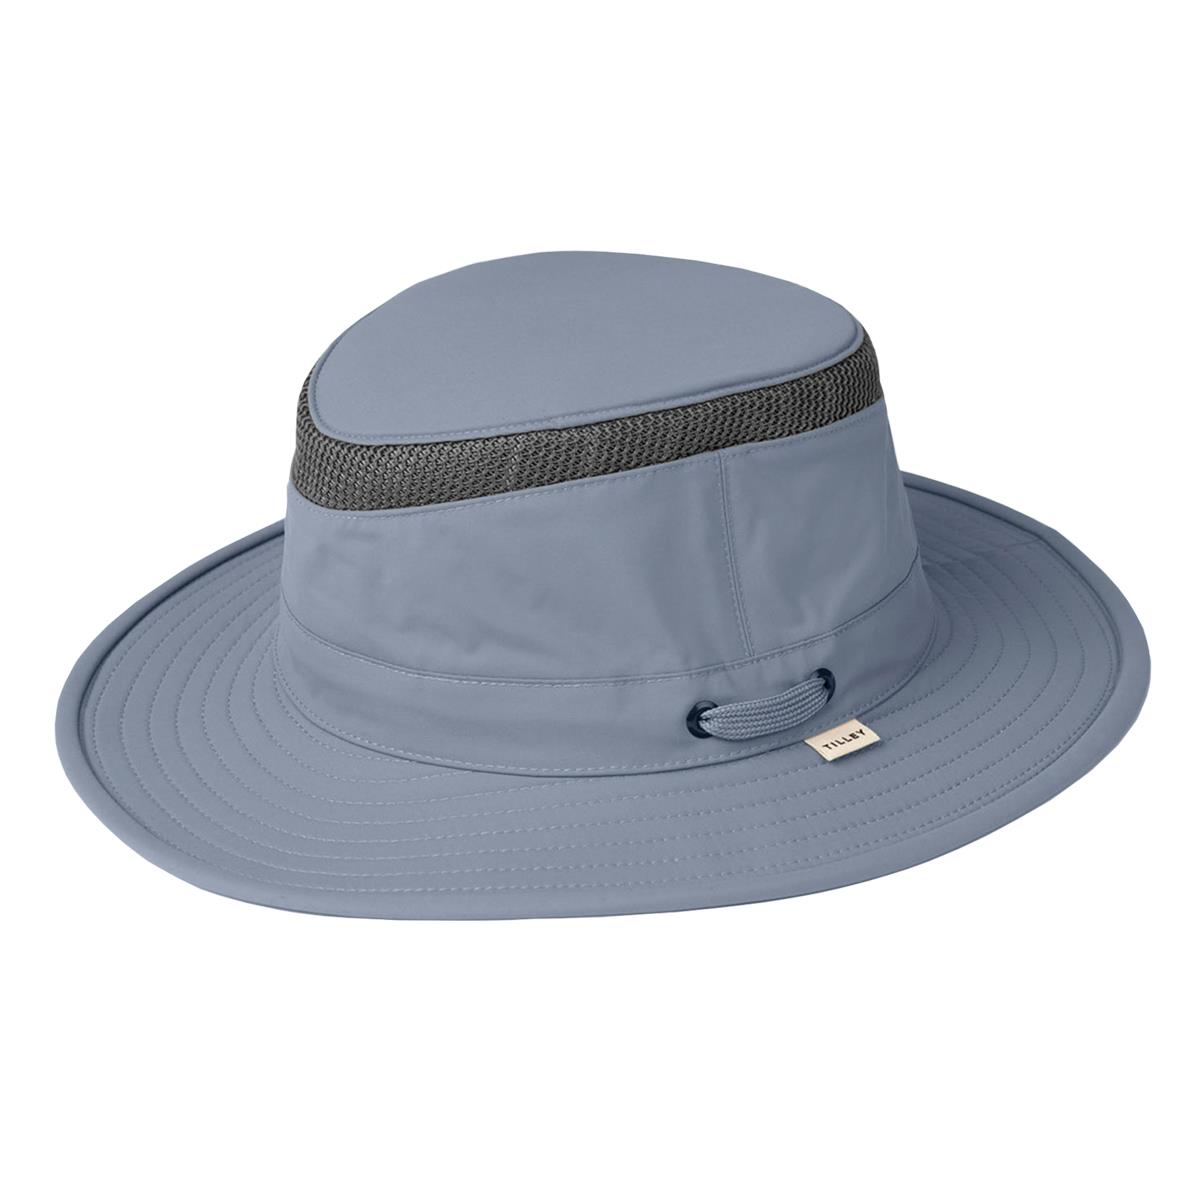 What is the sun protection rating for the Tilley LTM5 hat?